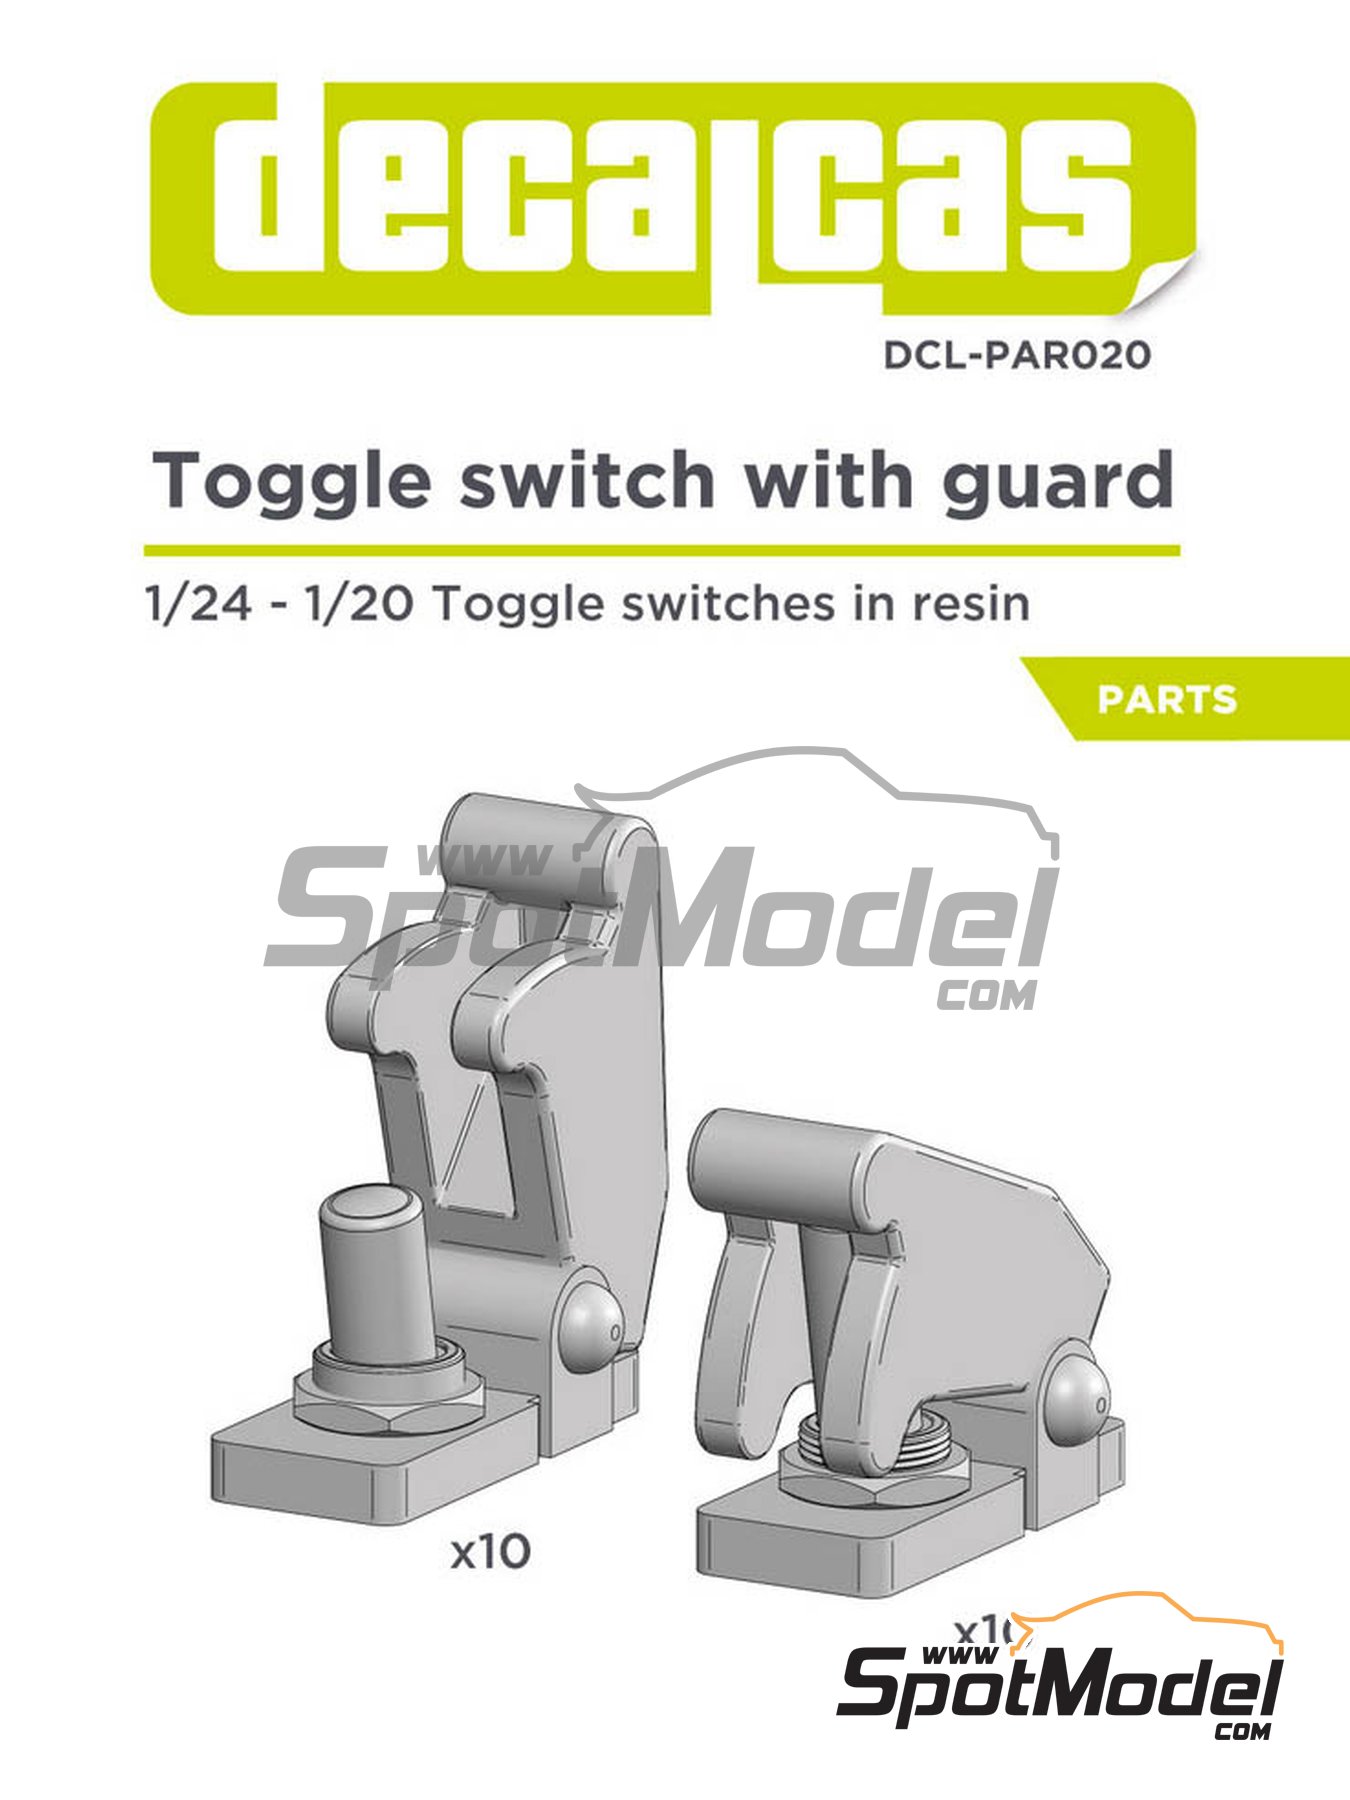 DCL-PAR022 DECALCAS 1/24 1/20 TOGGLE SWITCHES 